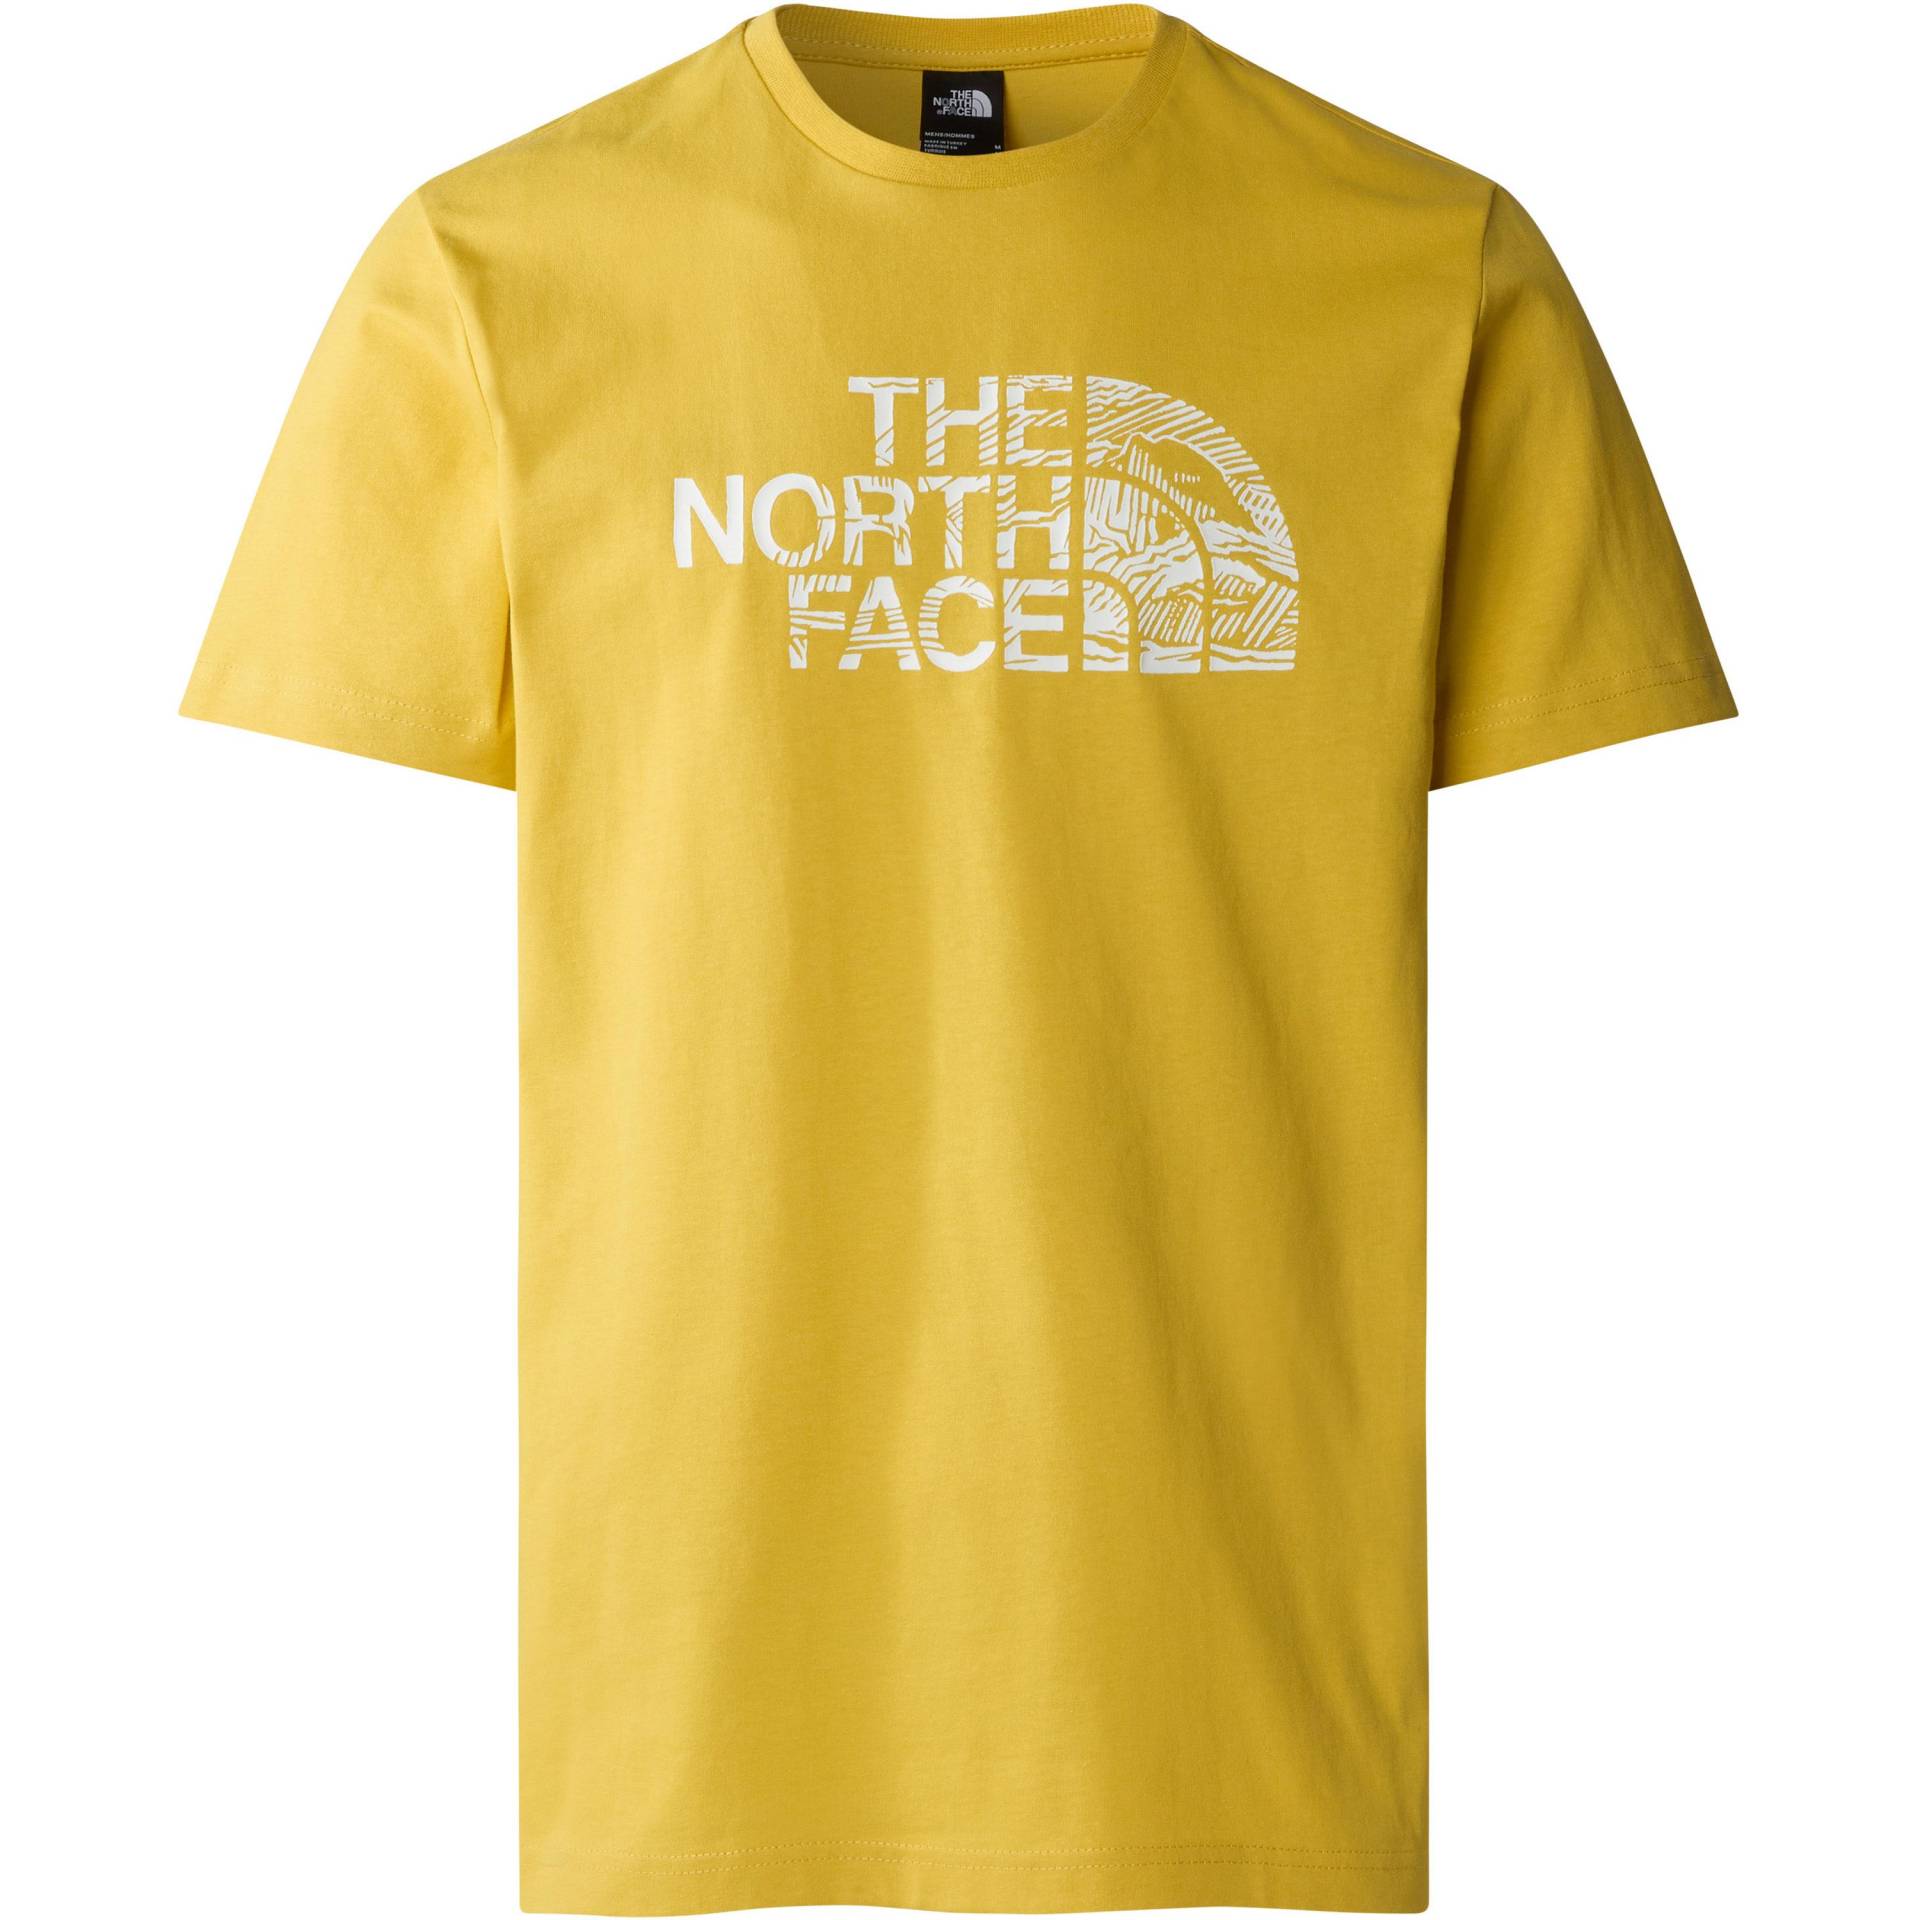 The North Face WOODCUT DOME T-Shirt Herren von The North Face